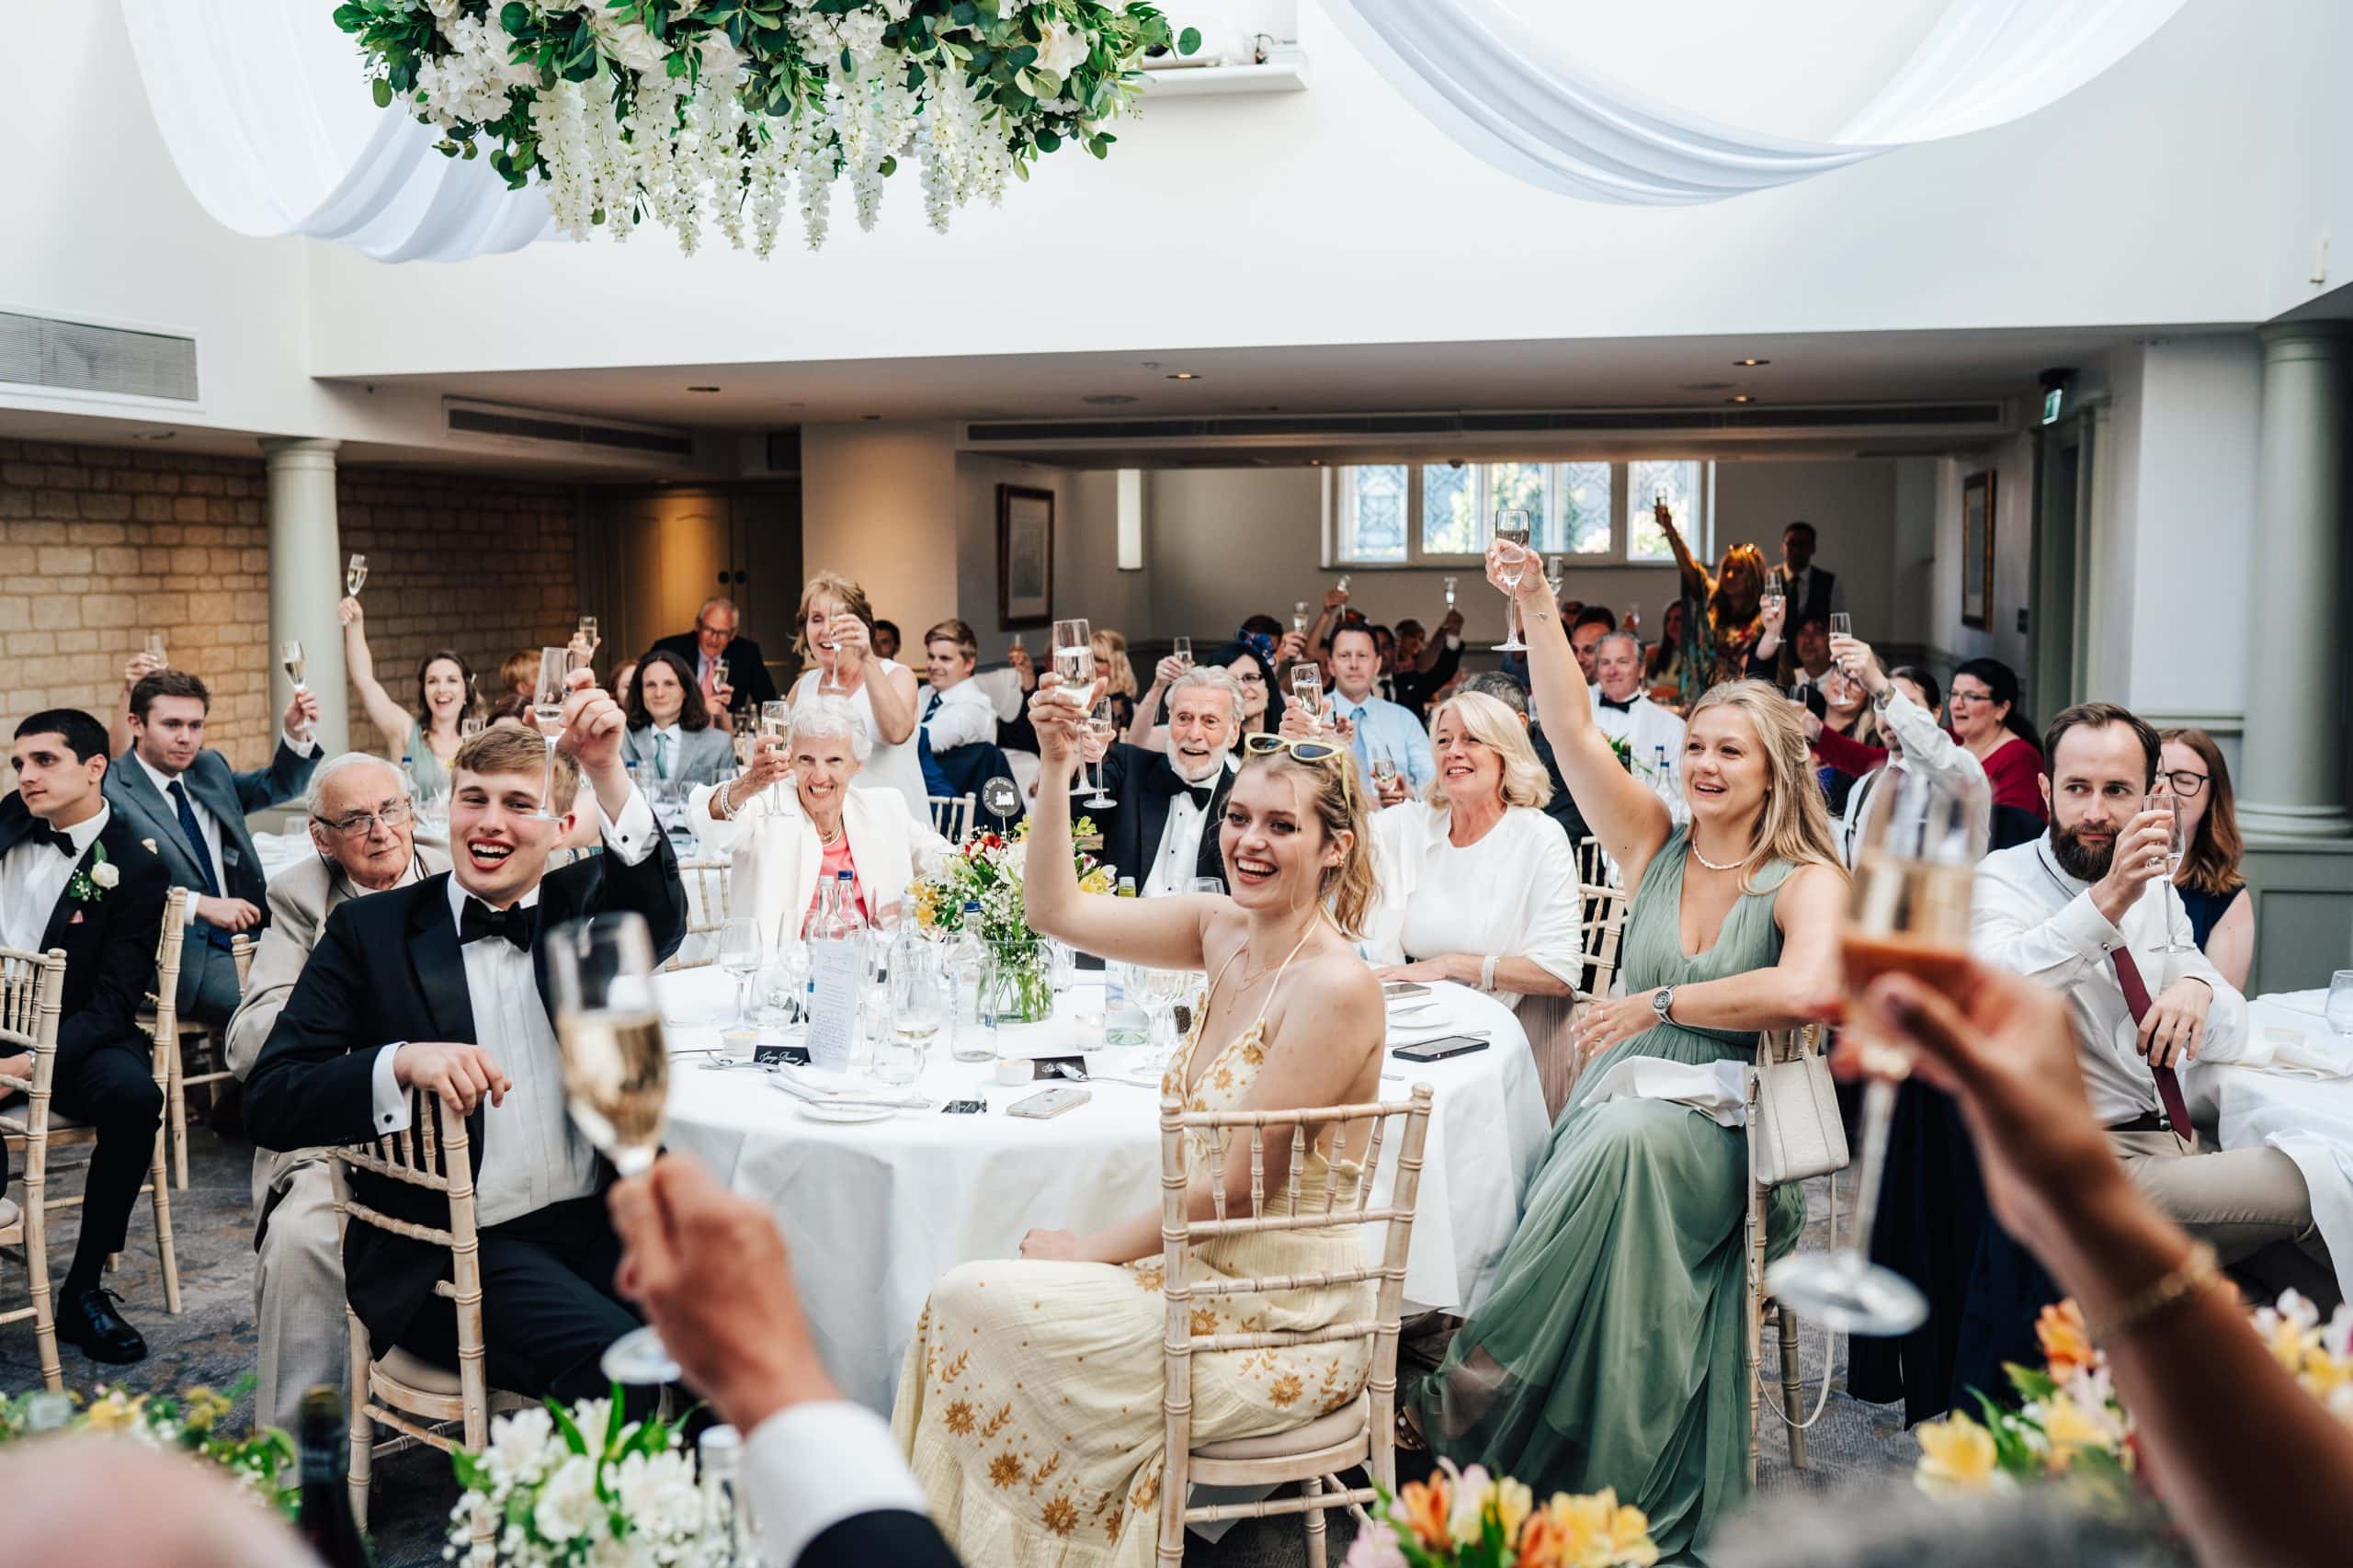 As the speeches end, the wedding party raise their glasses for a toast to celebrate this gorgeous wedding at Ellenborough Park Hotel